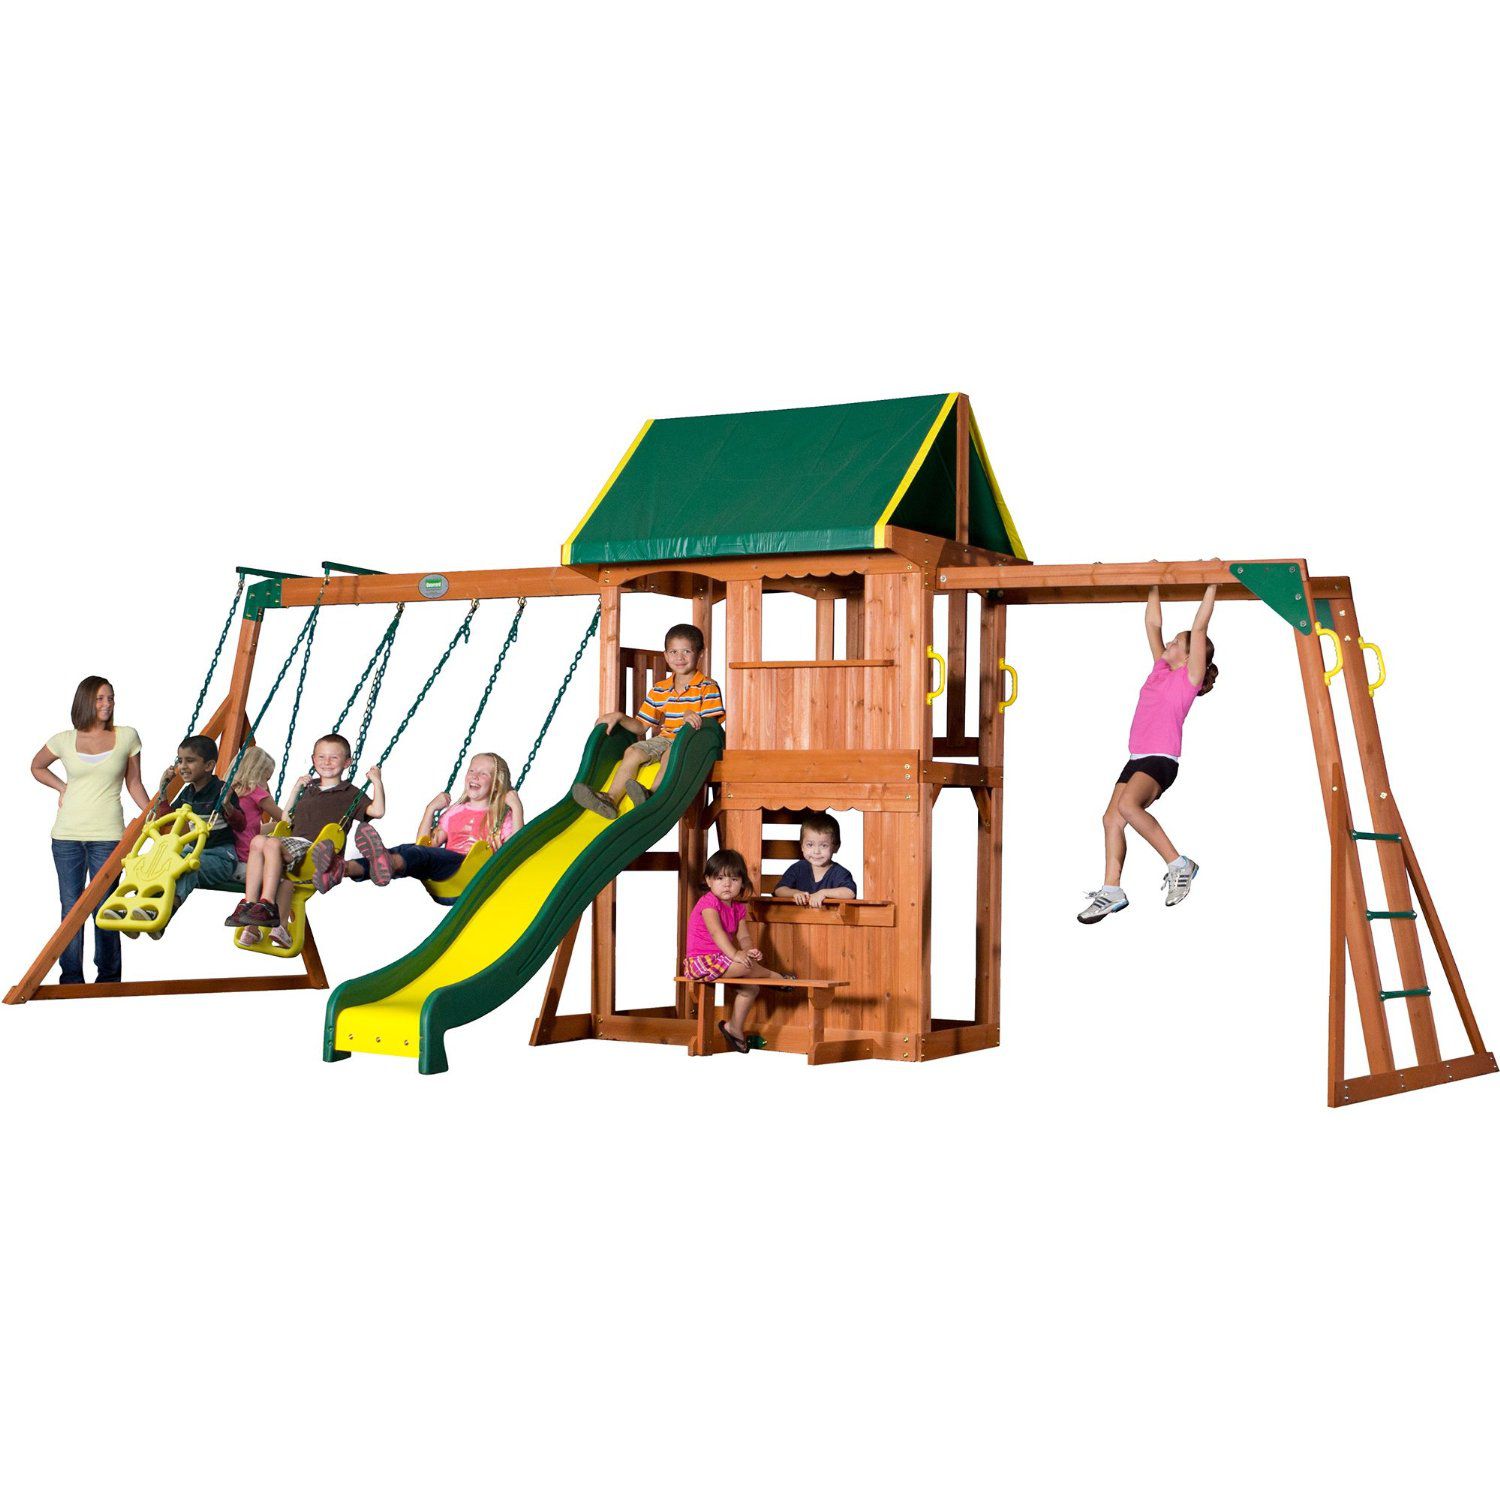 The 10 Best Wooden Swing Sets And Playsets Of 2018